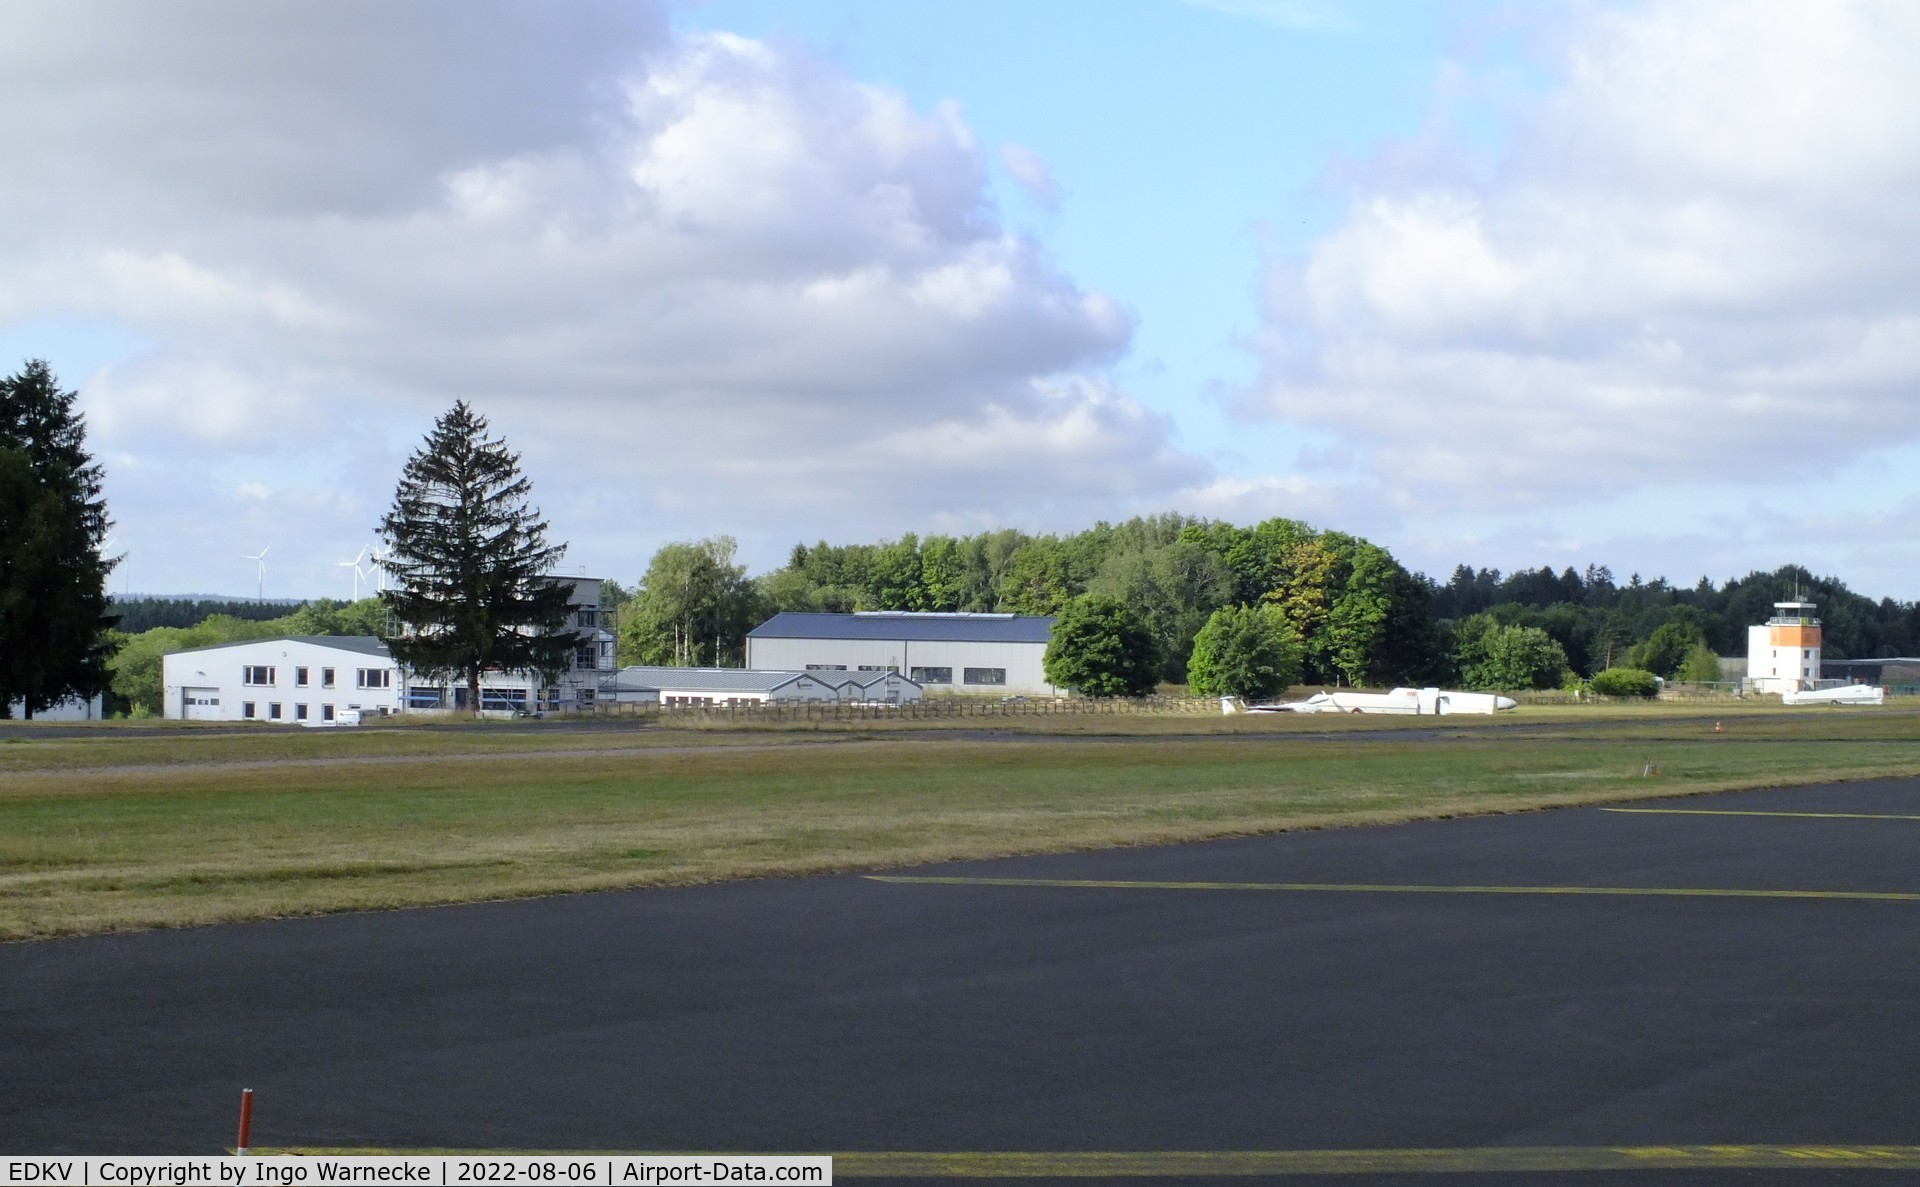 Dahlemer Binz Airport, Dahlem Germany (EDKV) - view across the airfield of the central buildings and hangars at Dahlemer Binz airfield